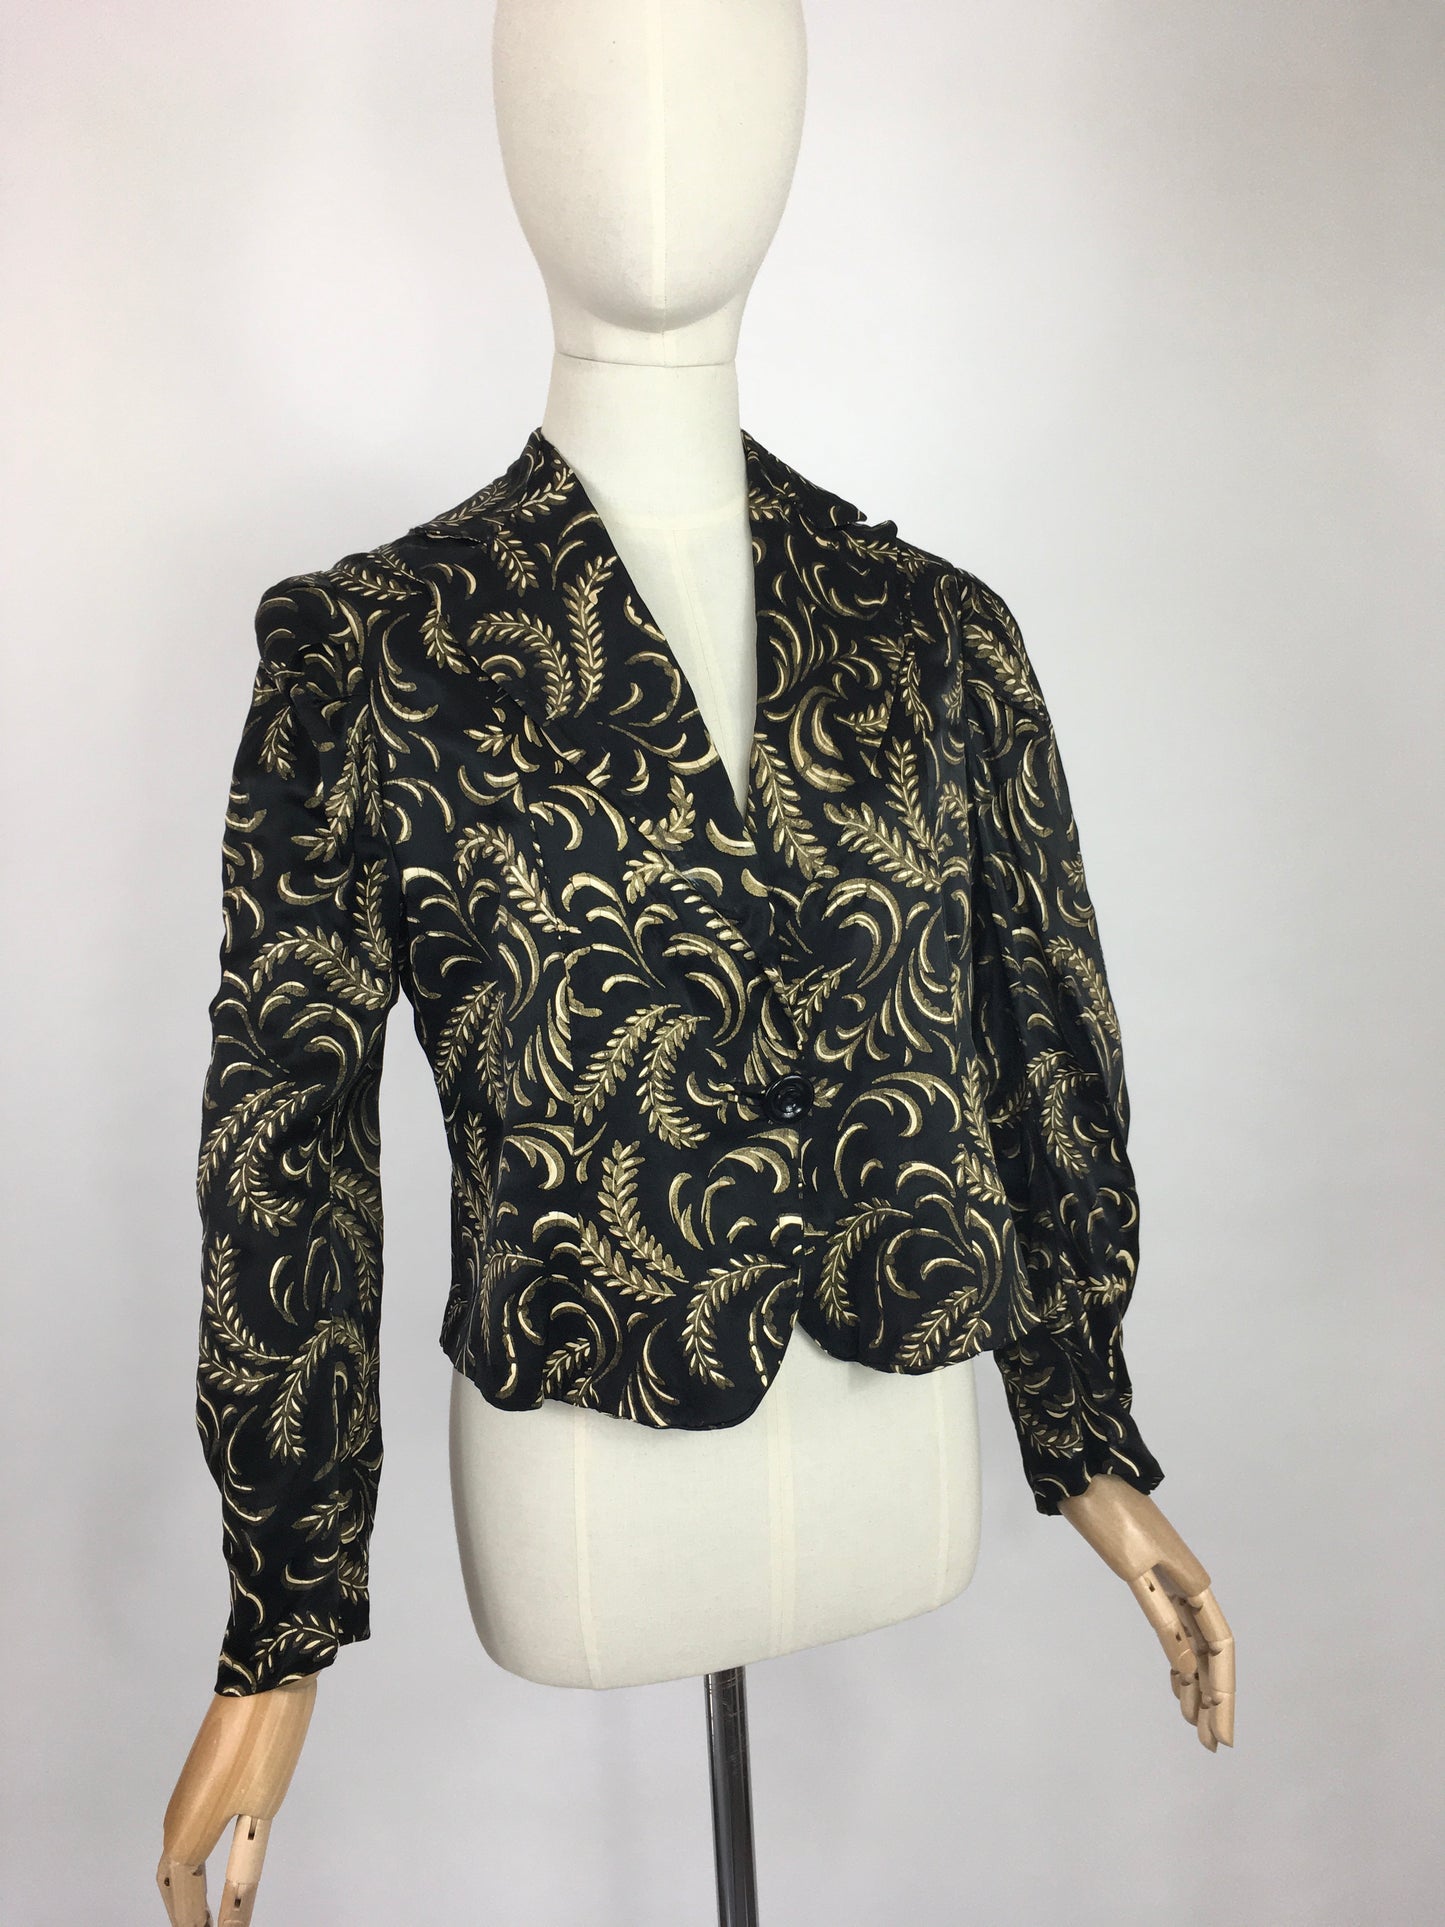 Original 1930s Exquisite Evening Jacket - In a Beautiful Handpainted Silk in a Scrollwork Design in Tones Of Gold